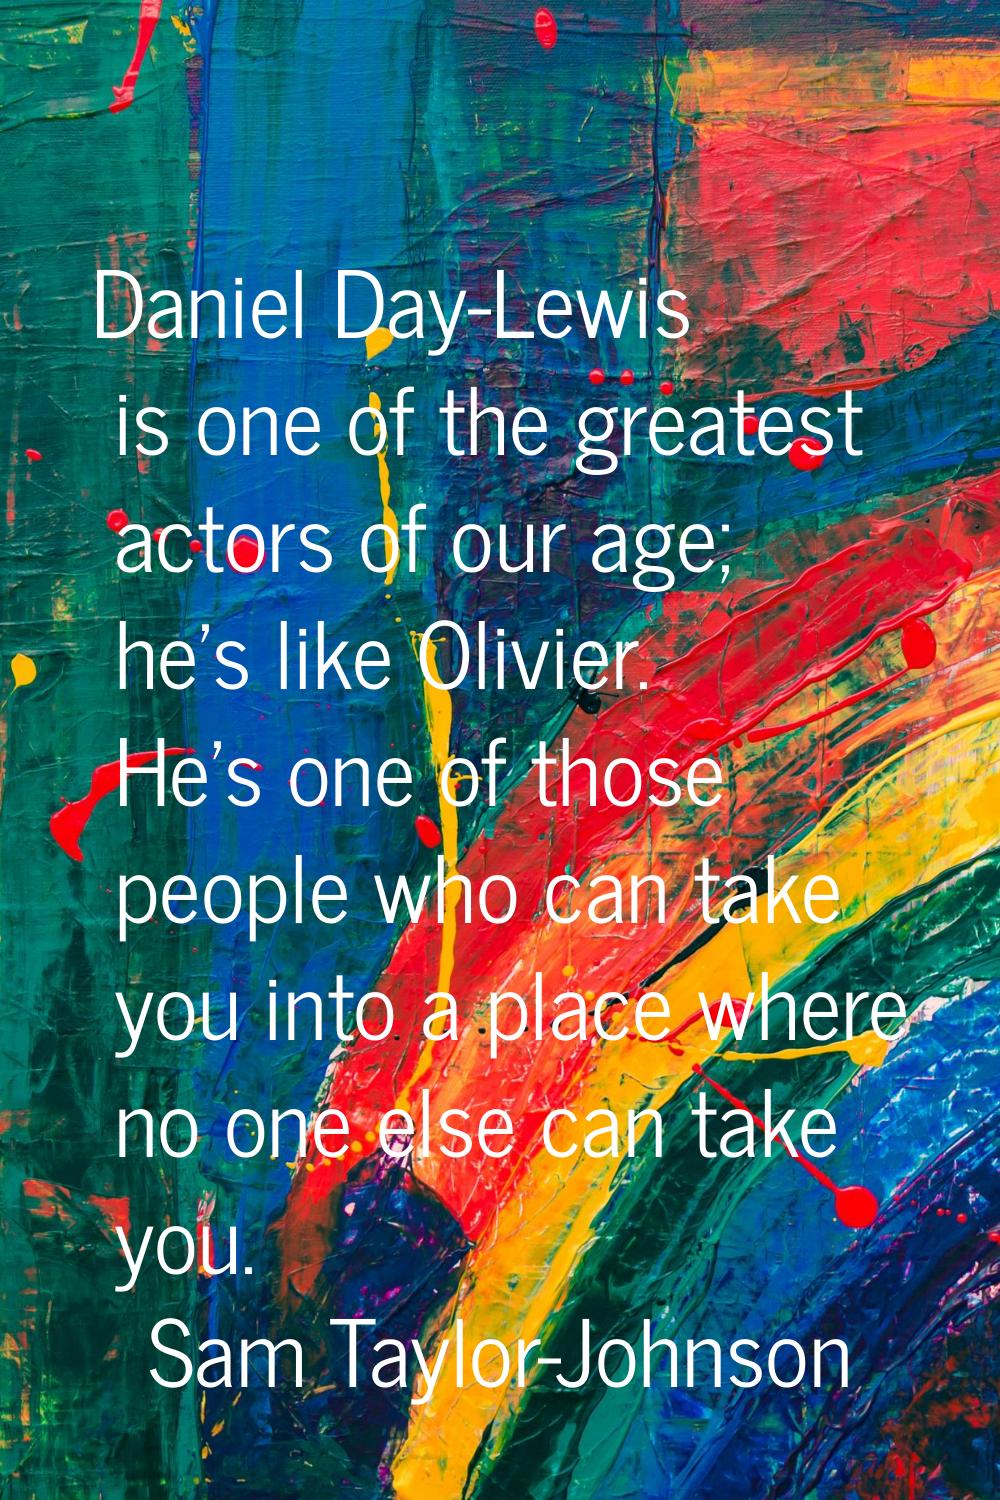 Daniel Day-Lewis is one of the greatest actors of our age; he's like Olivier. He's one of those peo